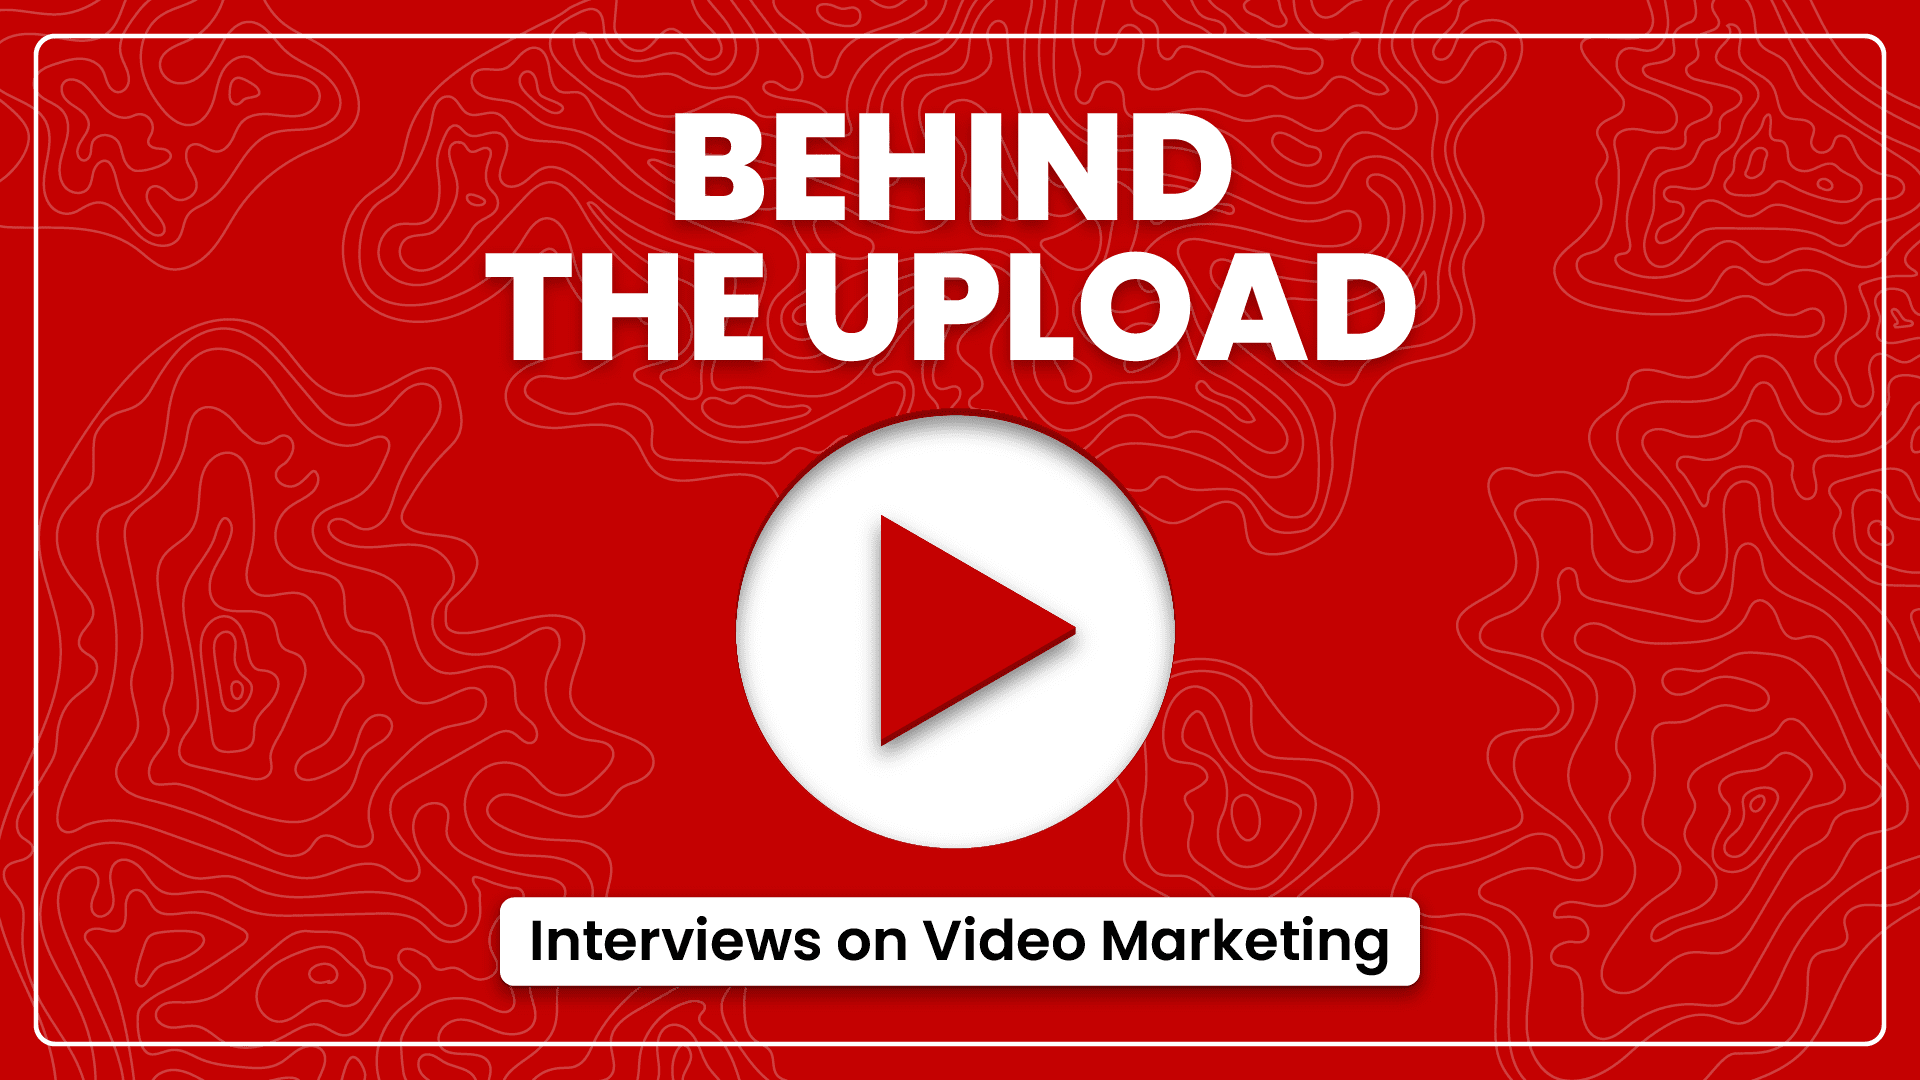 Behind the Upload poster with a play button